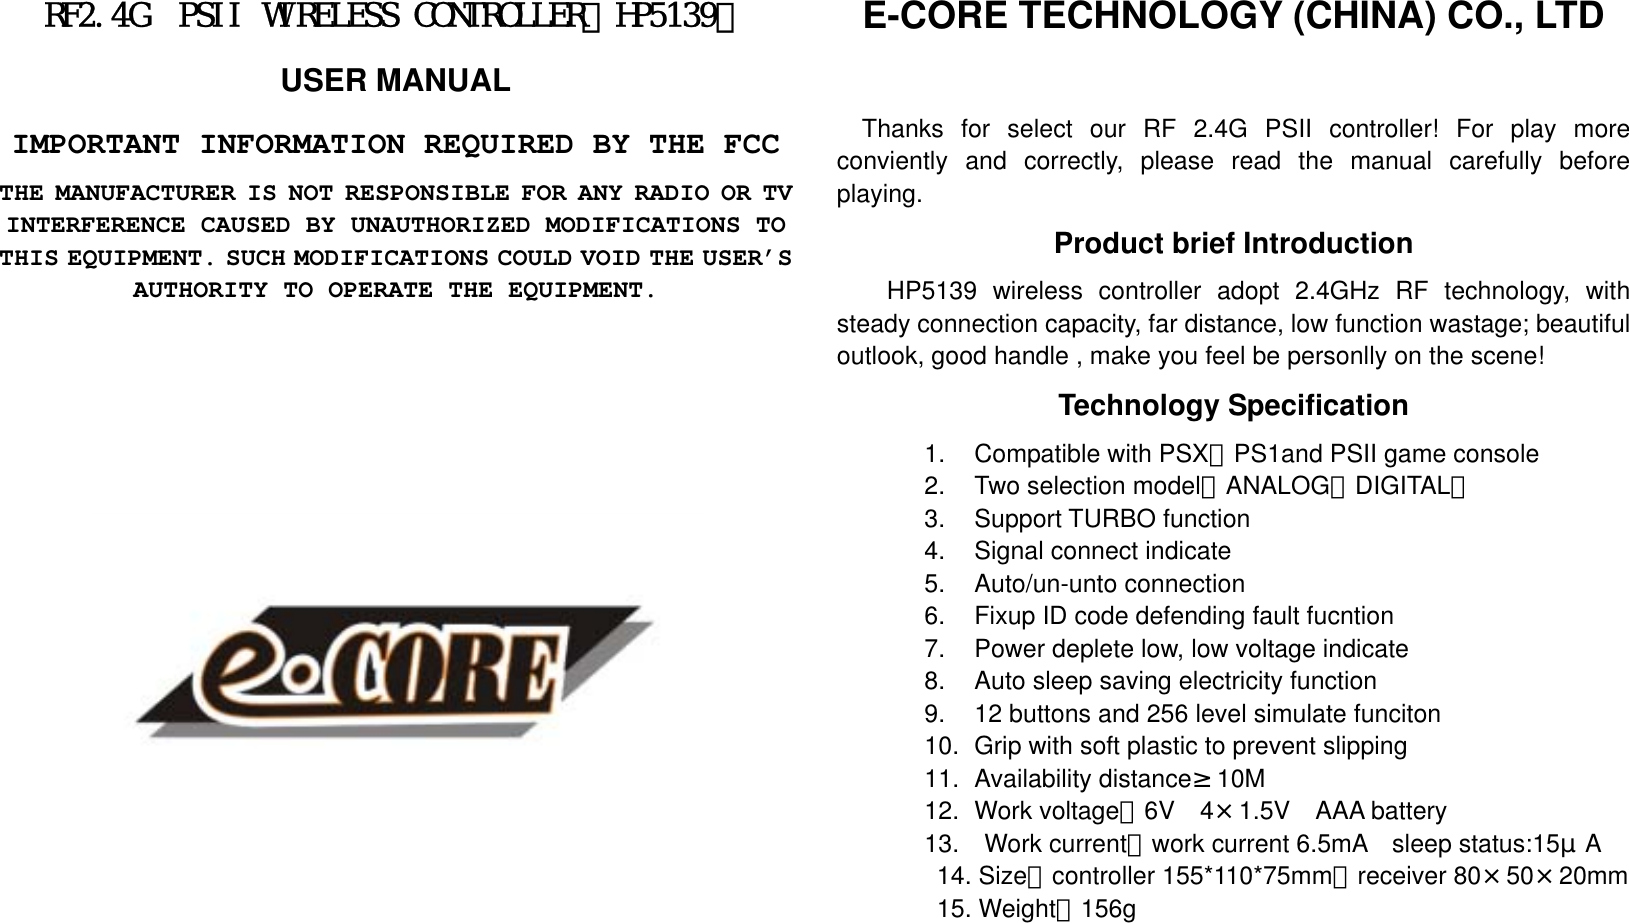 RF2.4G PSII WIRELESS CONTROLLER（HP5139） USER MANUAL IMPORTANT INFORMATION REQUIRED BY THE FCC THE MANUFACTURER IS NOT RESPONSIBLE FOR ANY RADIO OR TV INTERFERENCE CAUSED BY UNAUTHORIZED MODIFICATIONS TO THIS EQUIPMENT. SUCH MODIFICATIONS COULD VOID THE USER’S AUTHORITY TO OPERATE THE EQUIPMENT.                E-CORE TECHNOLOGY (CHINA) CO., LTD     Thanks for select our RF 2.4G PSII controller! For play more conviently and correctly, please read the manual carefully before playing.   Product brief Introduction HP5139 wireless controller adopt 2.4GHz RF technology, with steady connection capacity, far distance, low function wastage; beautiful outlook, good handle , make you feel be personlly on the scene! Technology Specification 1.    Compatible with PSX、PS1and PSII game console 2.    Two selection model（ANALOG、DIGITAL） 3.  Support TURBO function 4.    Signal connect indicate 5.  Auto/un-unto connection 6.    Fixup ID code defending fault fucntion   7.    Power deplete low, low voltage indicate 8.    Auto sleep saving electricity function 9.    12 buttons and 256 level simulate funciton 10.   Grip with soft plastic to prevent slipping 11.   Availability distance≥10M 12.   Work  voltage：6V 4×1.5V AAA battery 13.  Work current：work current 6.5mA  sleep status:15μA 14. Size：controller 155*110*75mm；receiver 80×50×20mm 15. Weight：156g    